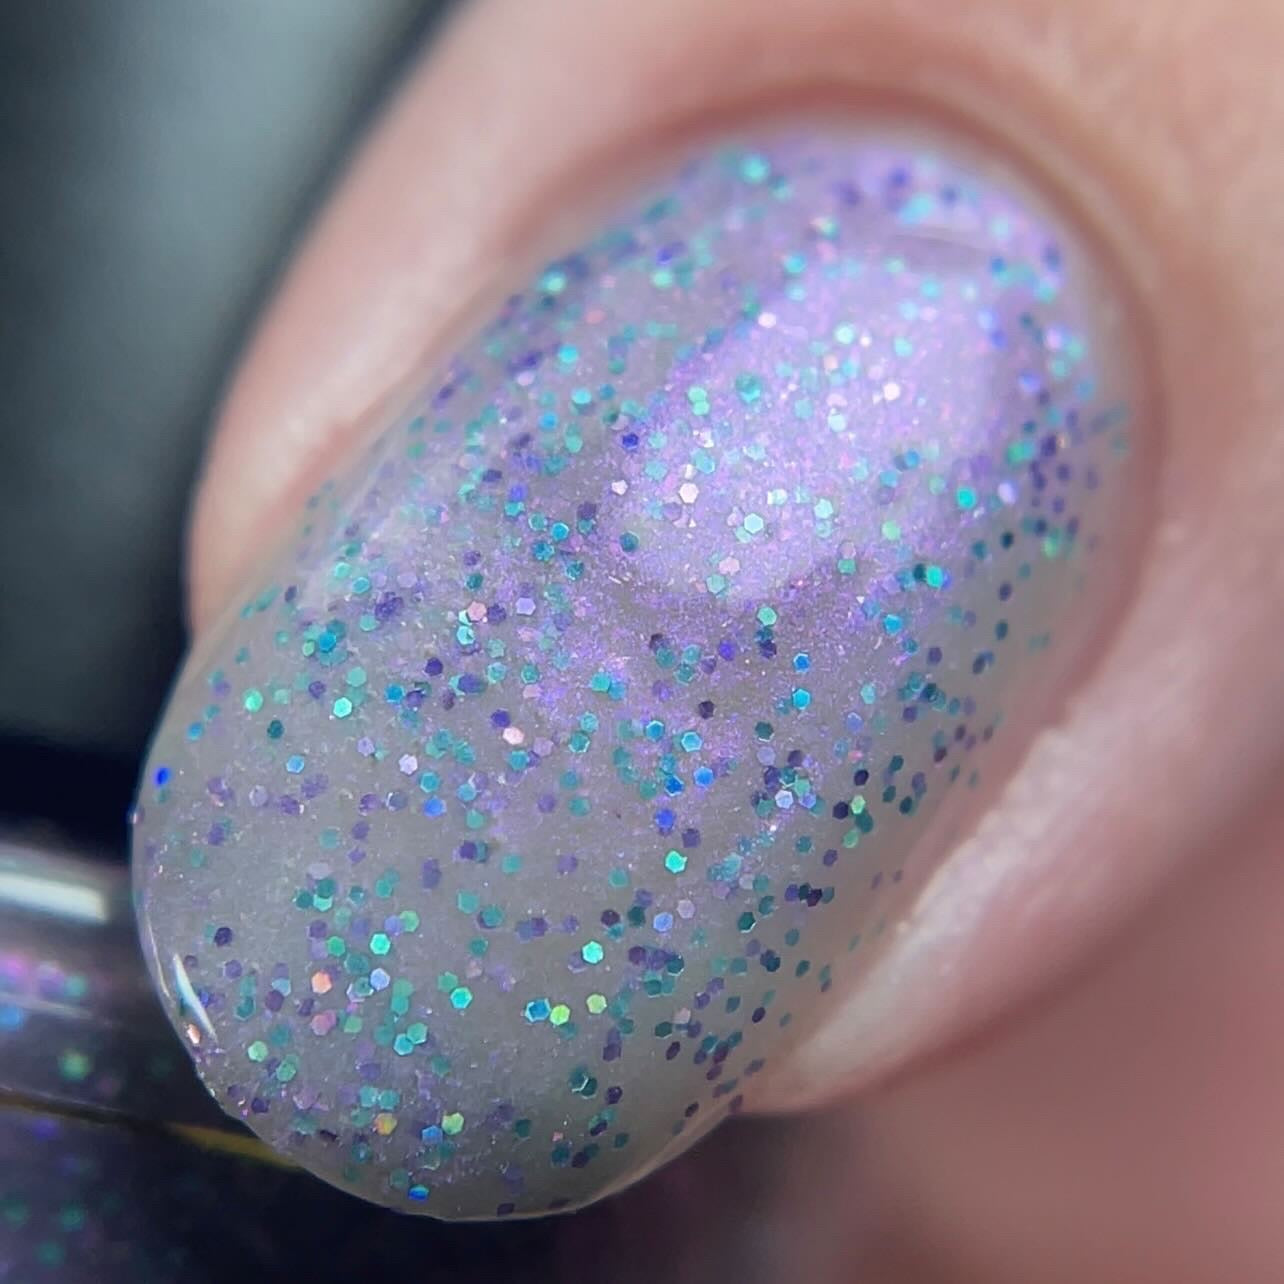 warm shading of Broken Ankle shows off glitter plus blue, turquoise and pink holographic flakes